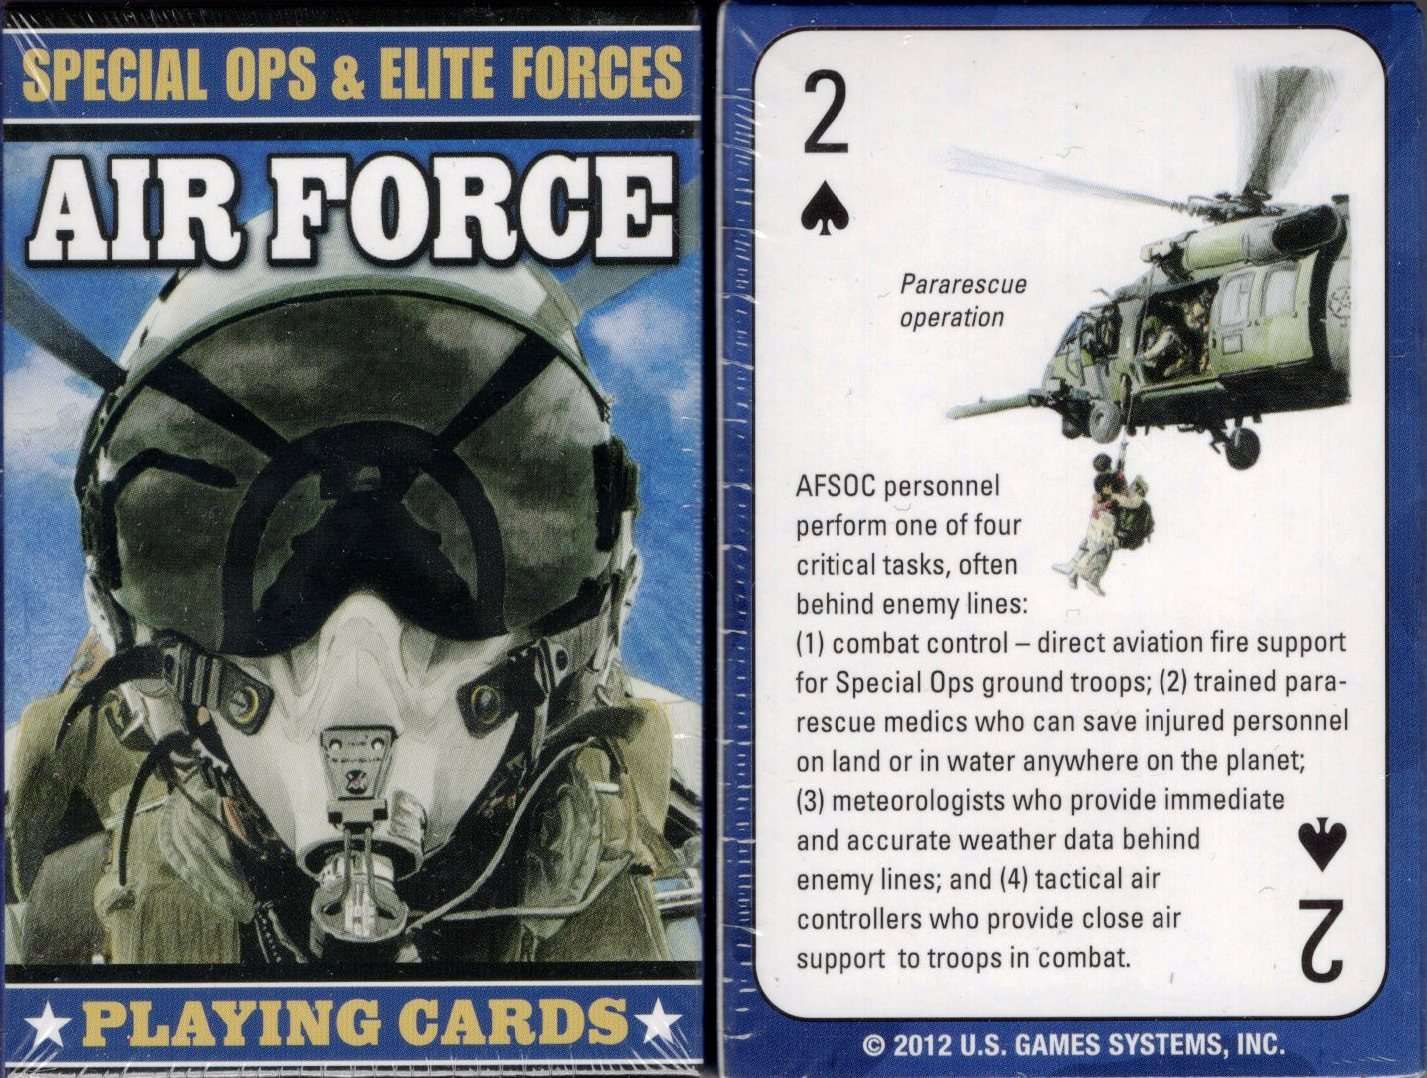 PlayingCardDecks.com-Special Ops & Elite Forces Air Force Playing Cards USGS